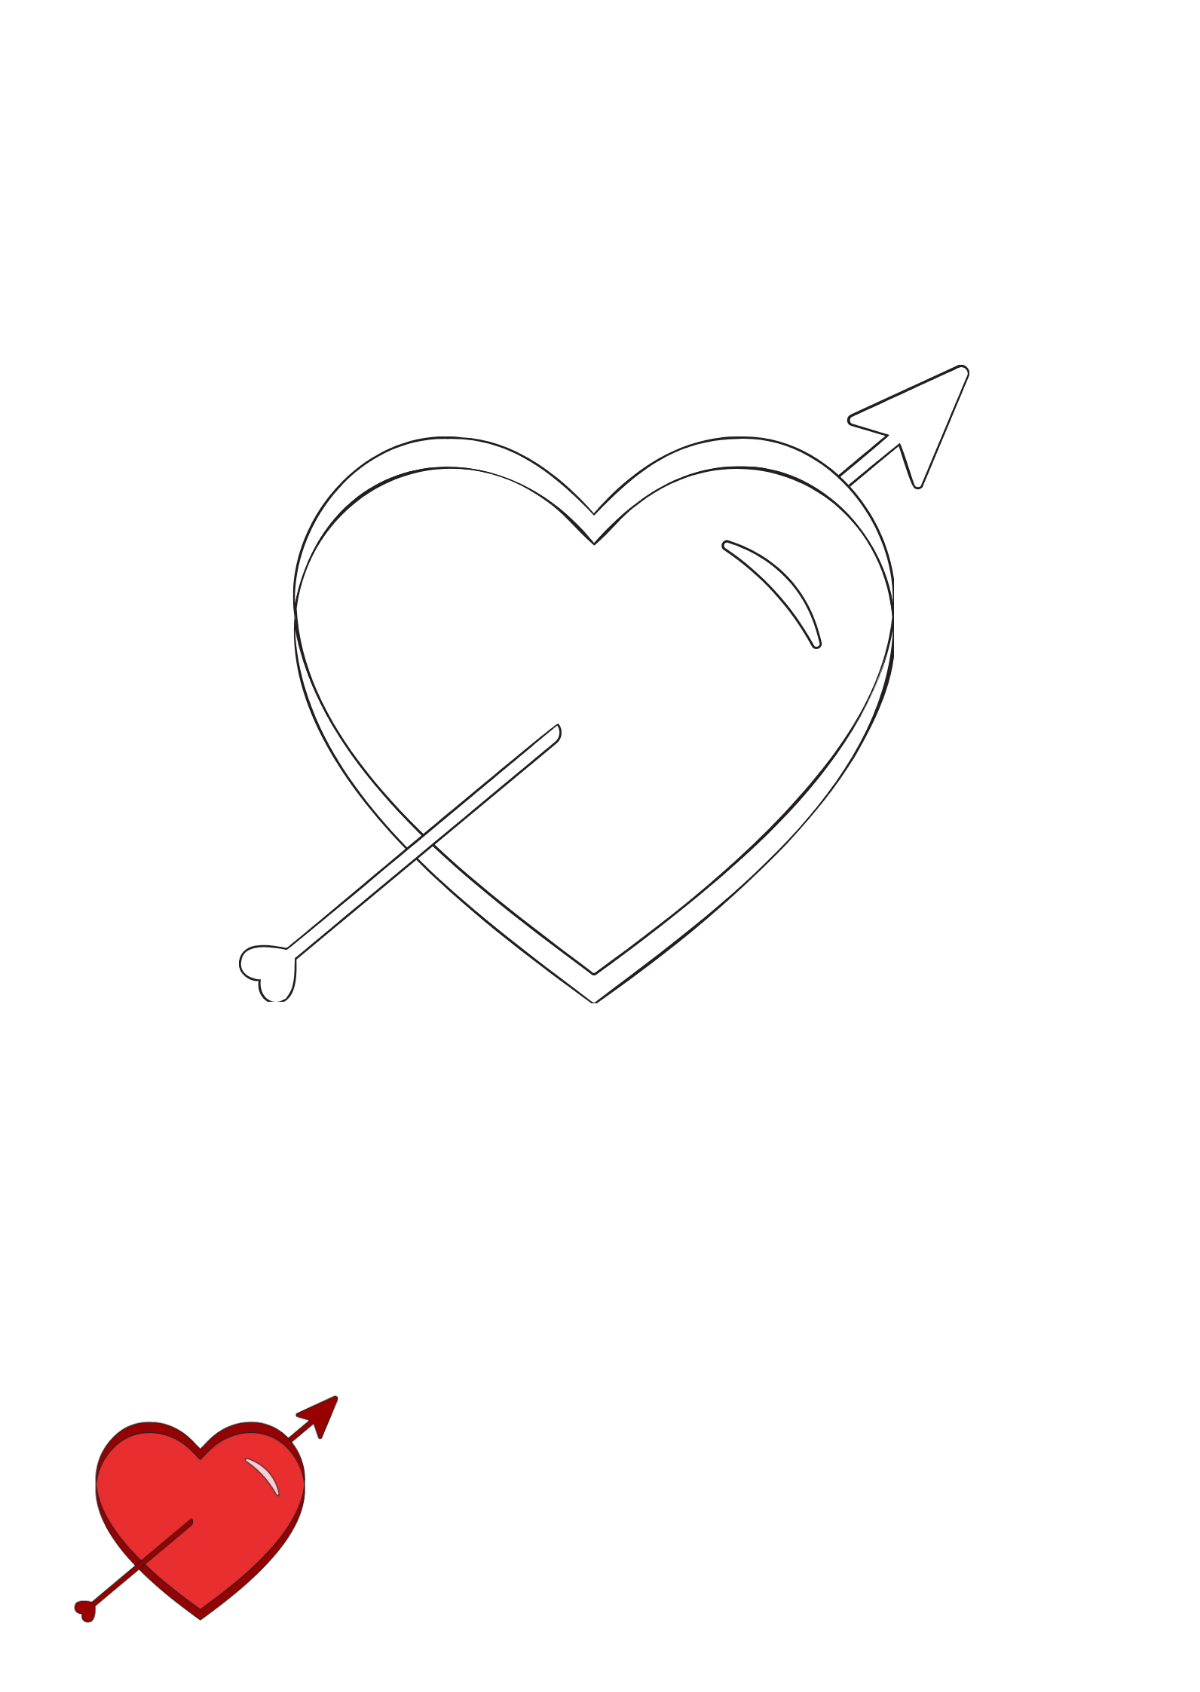 Red Heart With Arrow Coloring Page Template